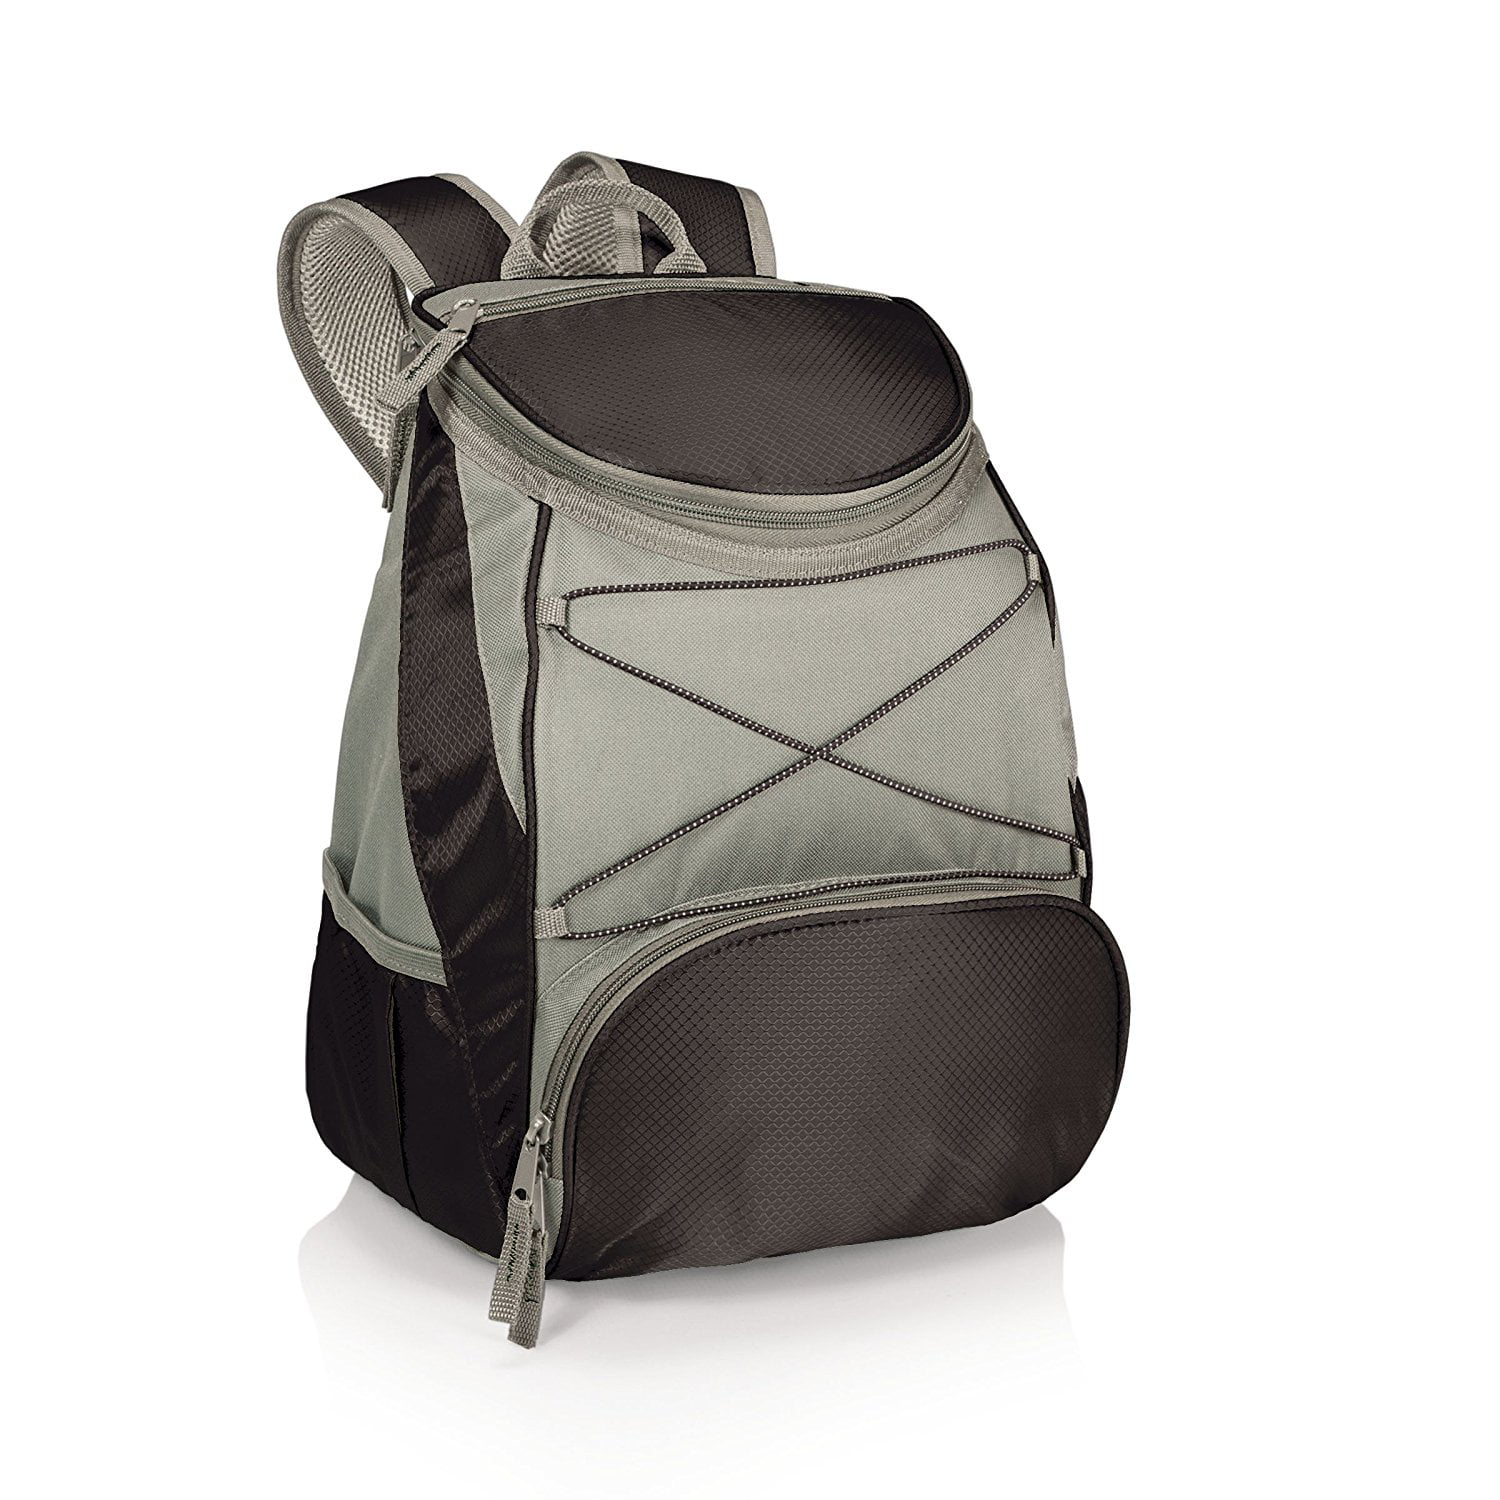 ONIVA - a Picnic Time Brand PTX Insulated Backpack Cooler, Black